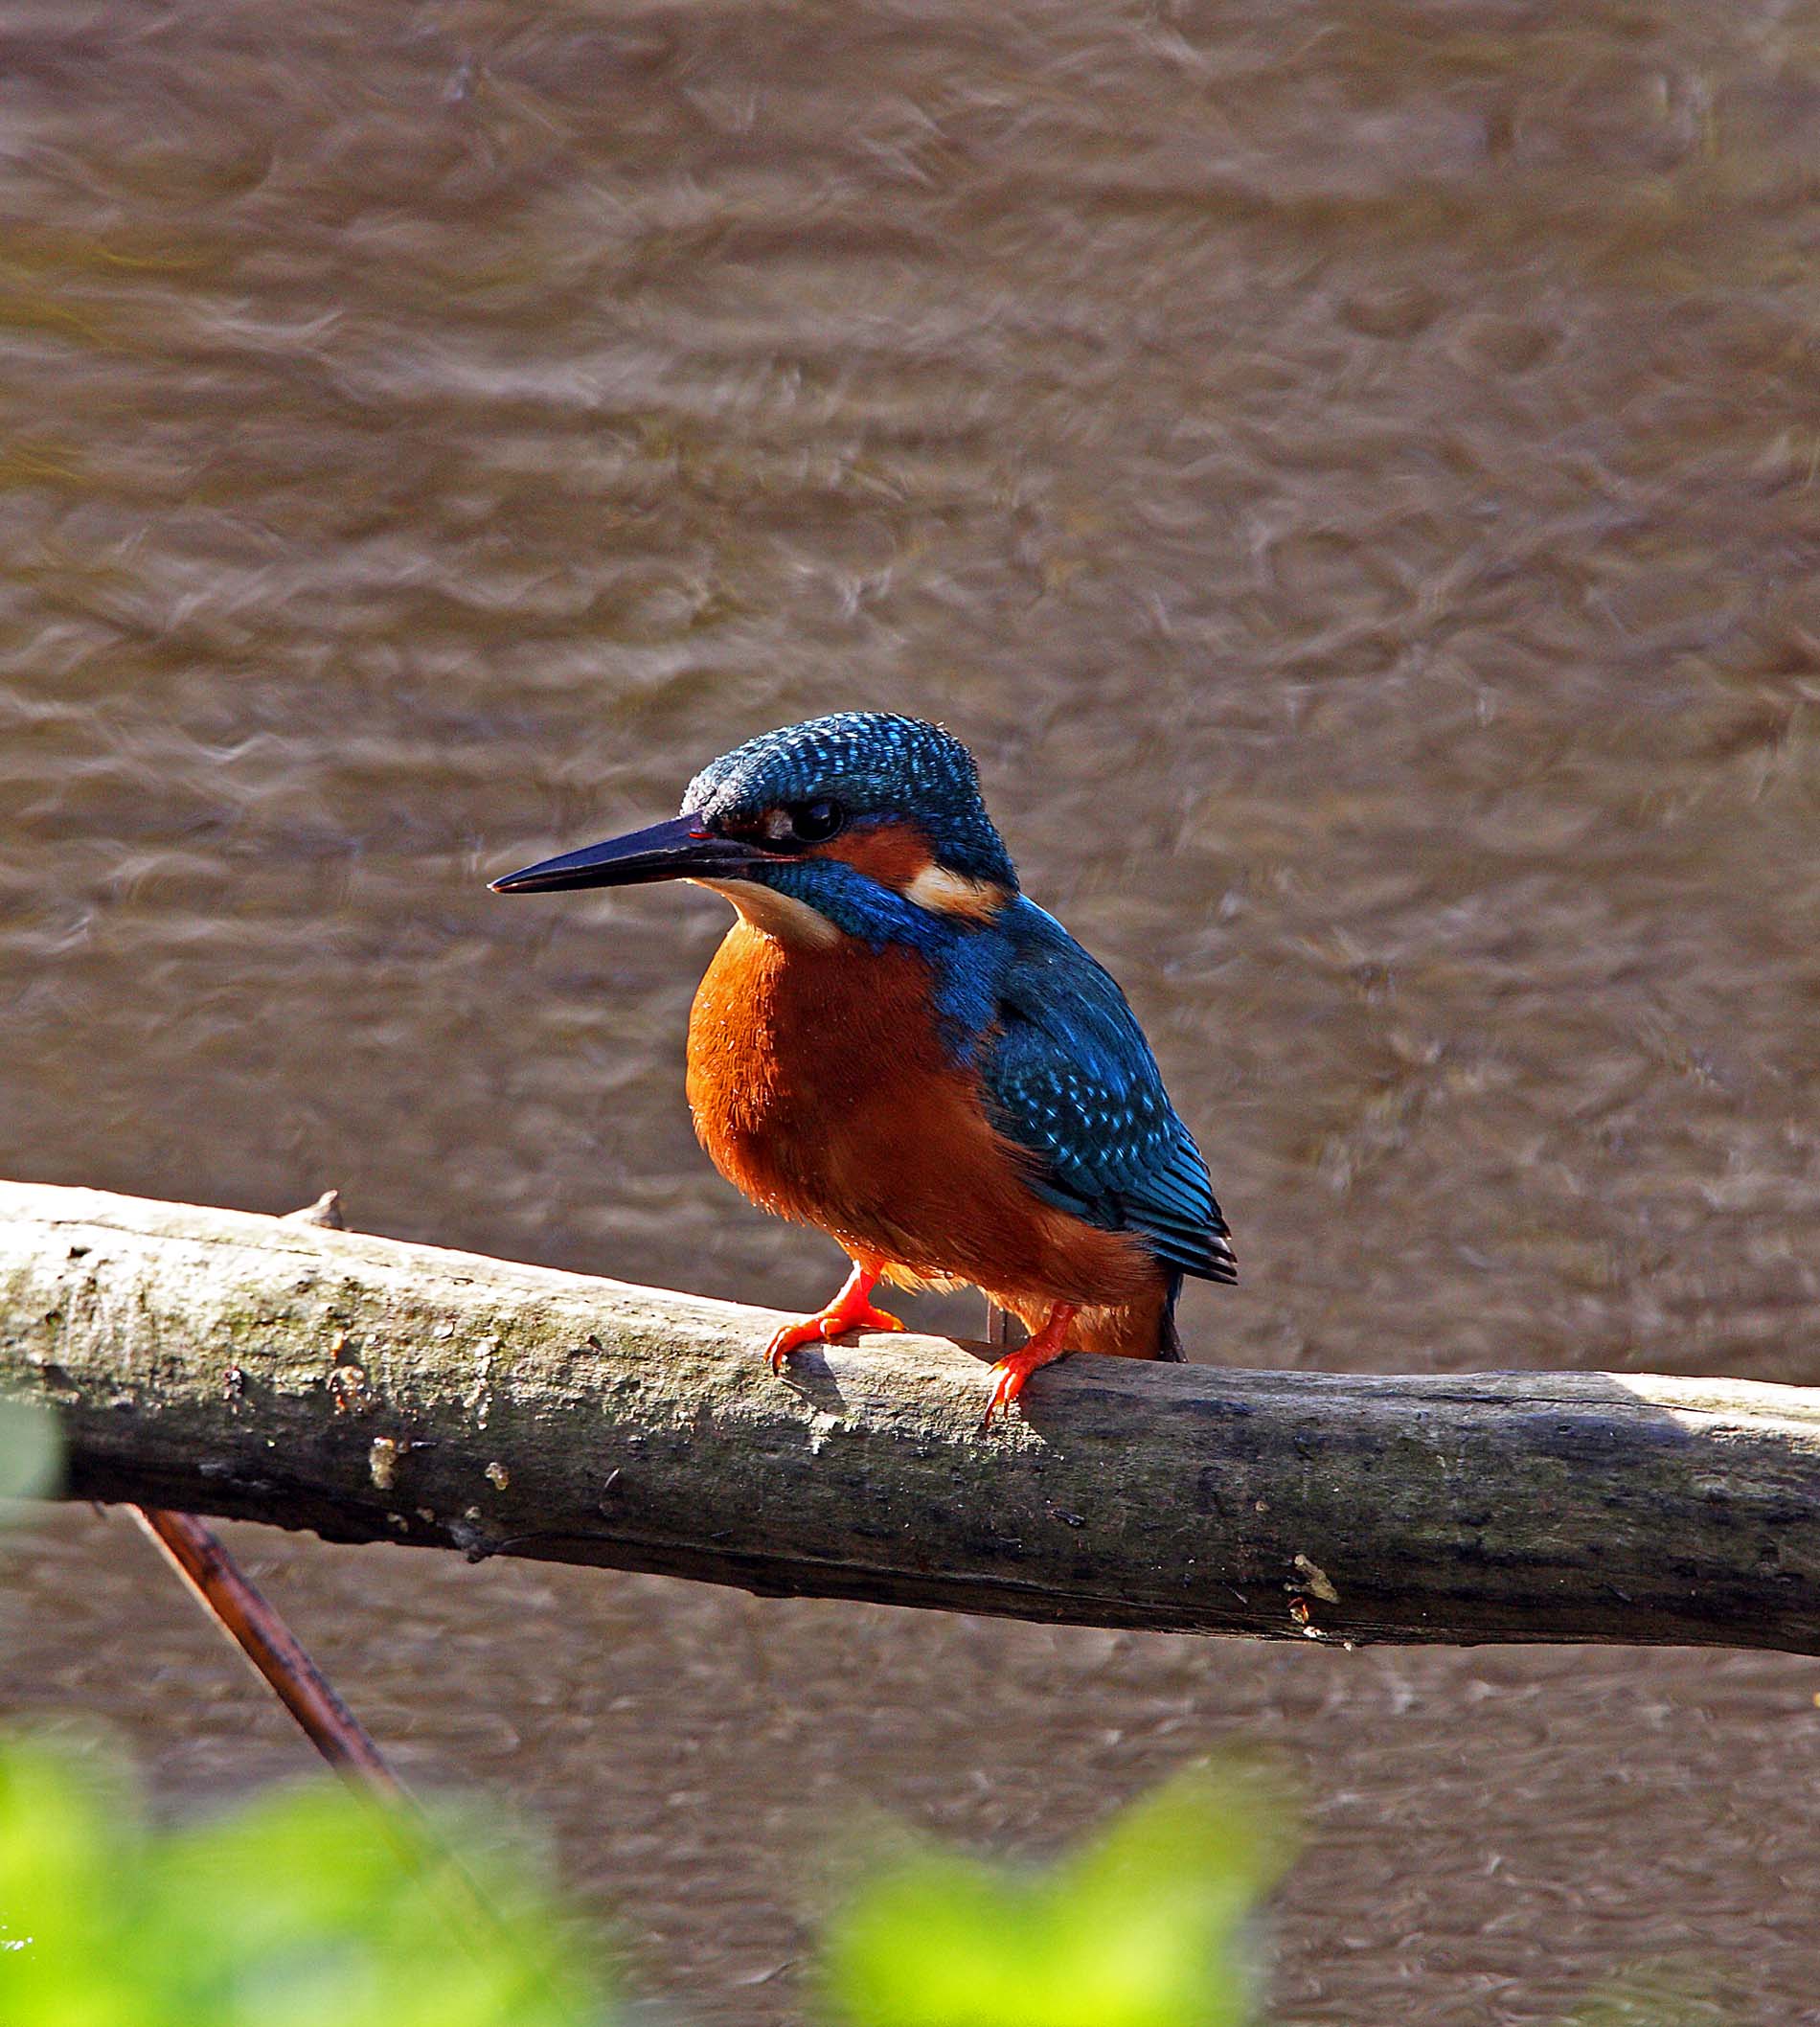 A close-up of a kingfisher.